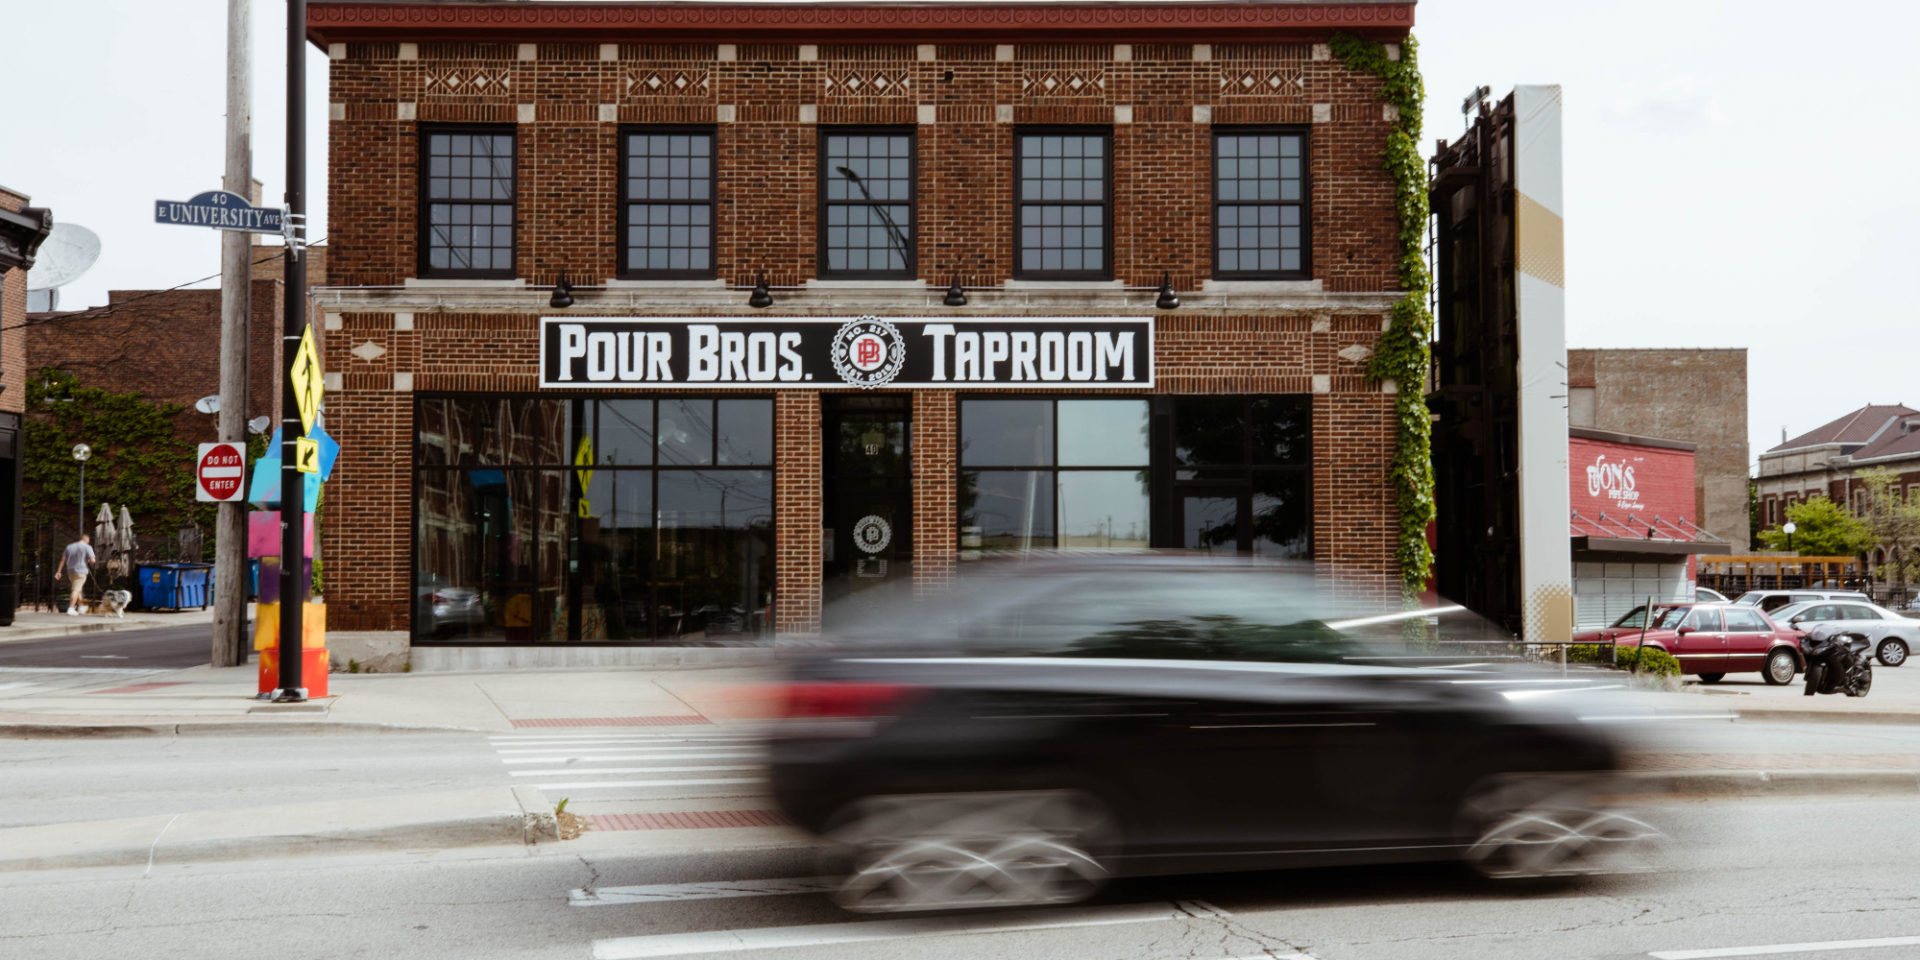 The exterior of Pour Bros. Craft Brewery for the Market Street Beer Fest in Champaign, Illinois. There is a brick building with Pour Bros on the outside above the door and a black car driving past is blurred. Photo by Anna Longworth-Singer.